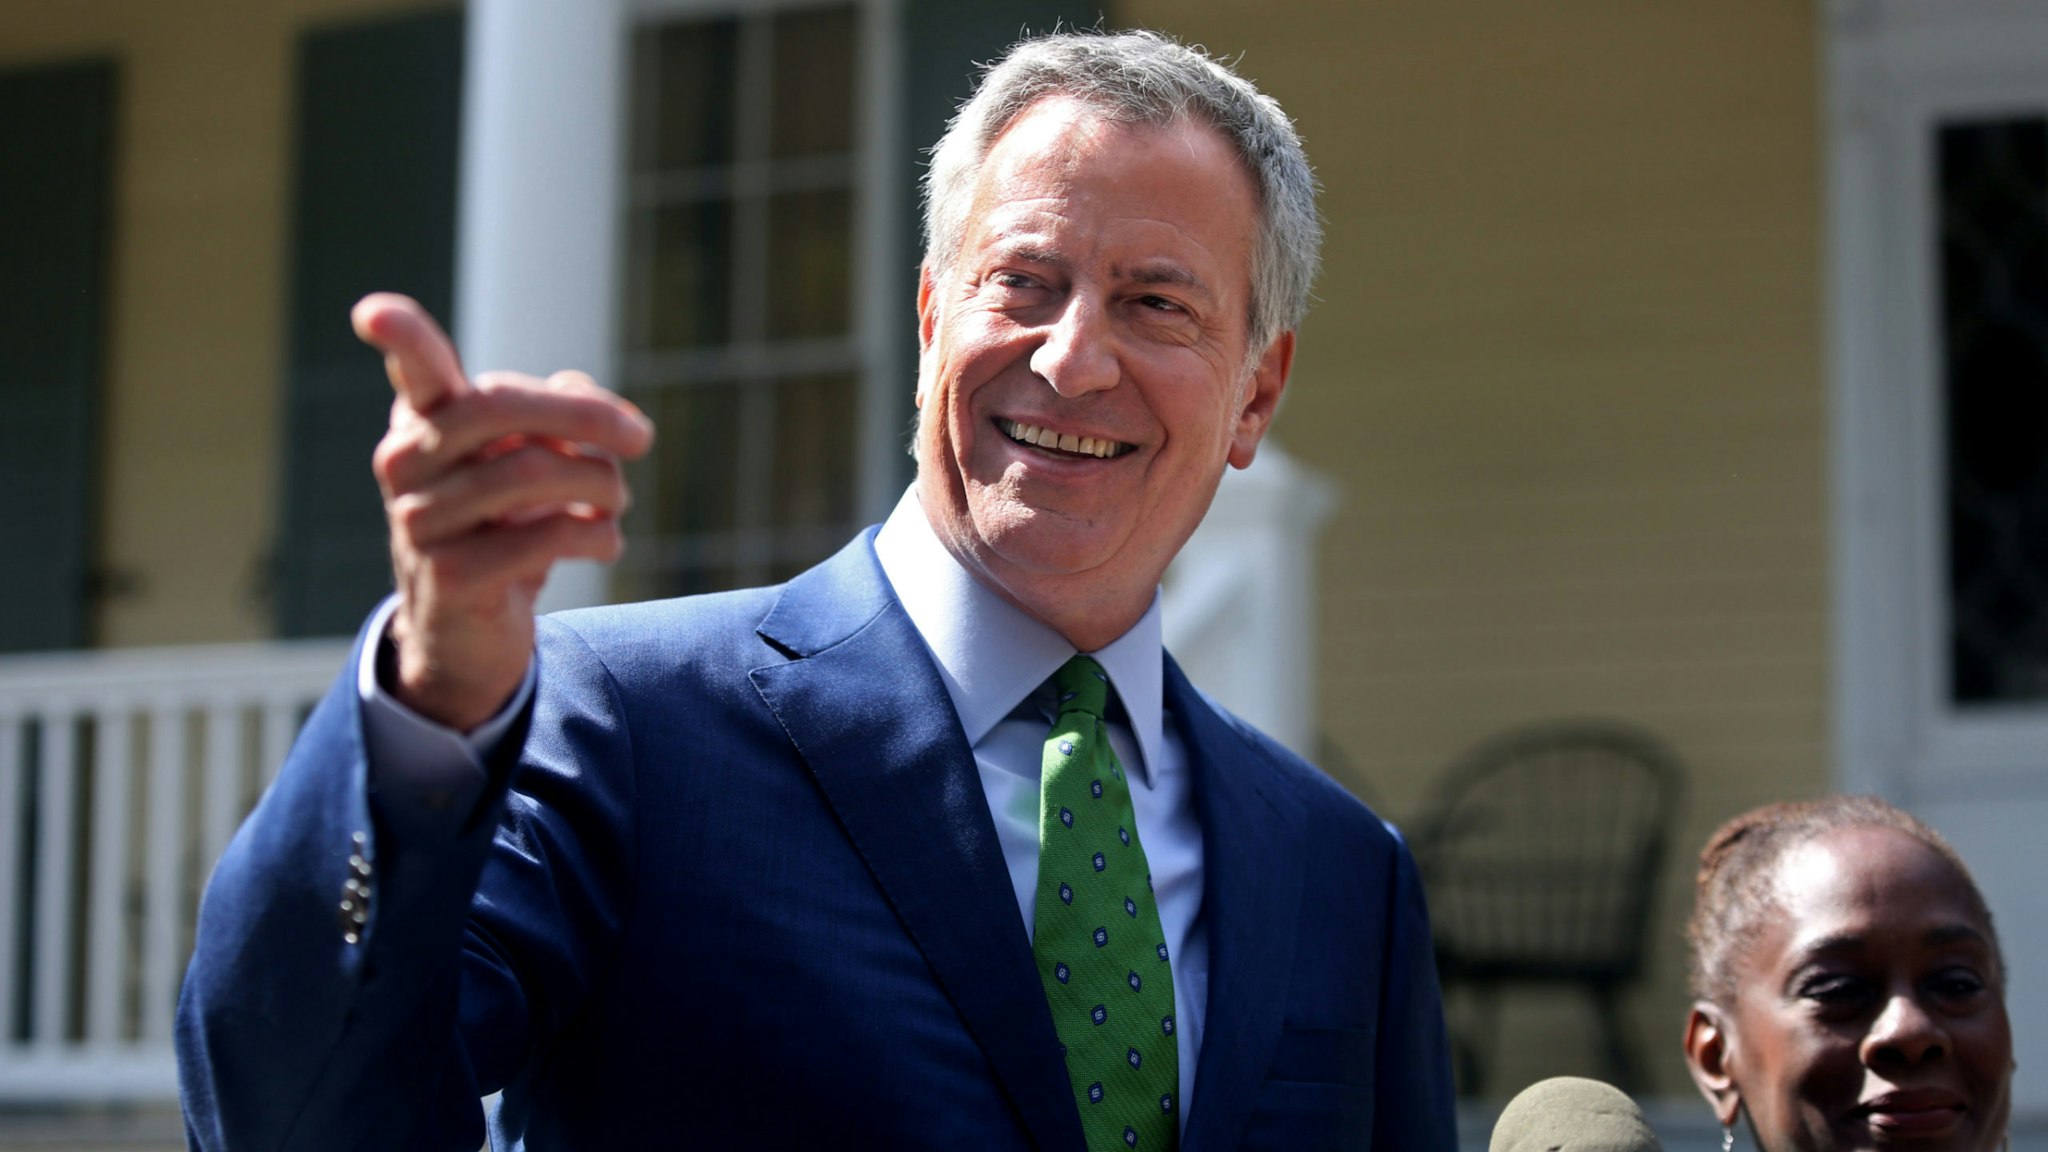 New York City Mayor Bill de Blasio speaks during a press conference held in front of Gracie Mansion on September 20, 2019 in New York City.